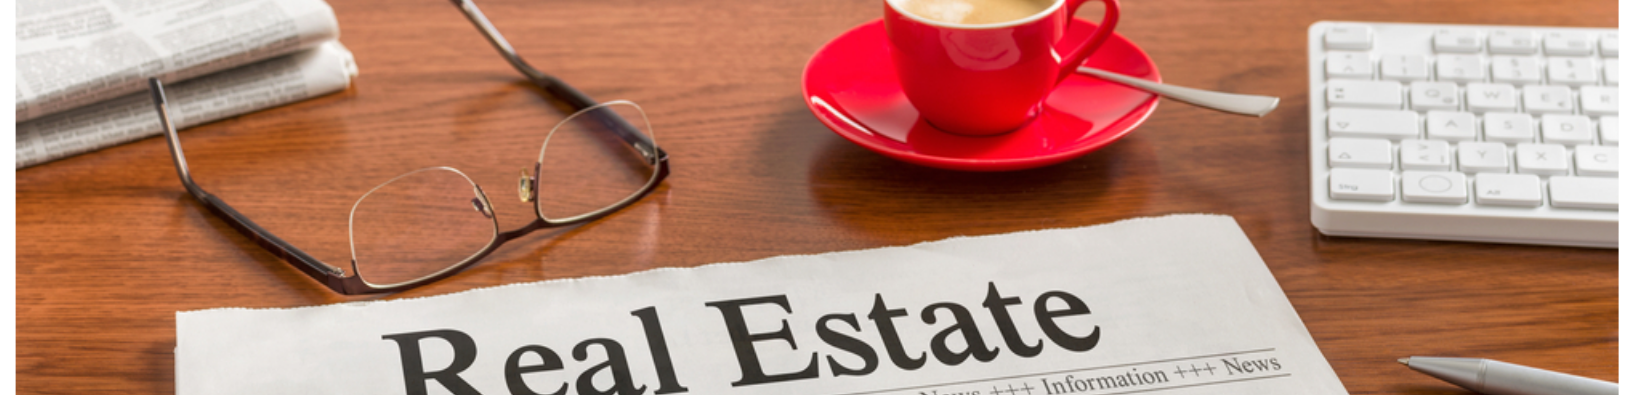 Real estate Marketing News, Articles India